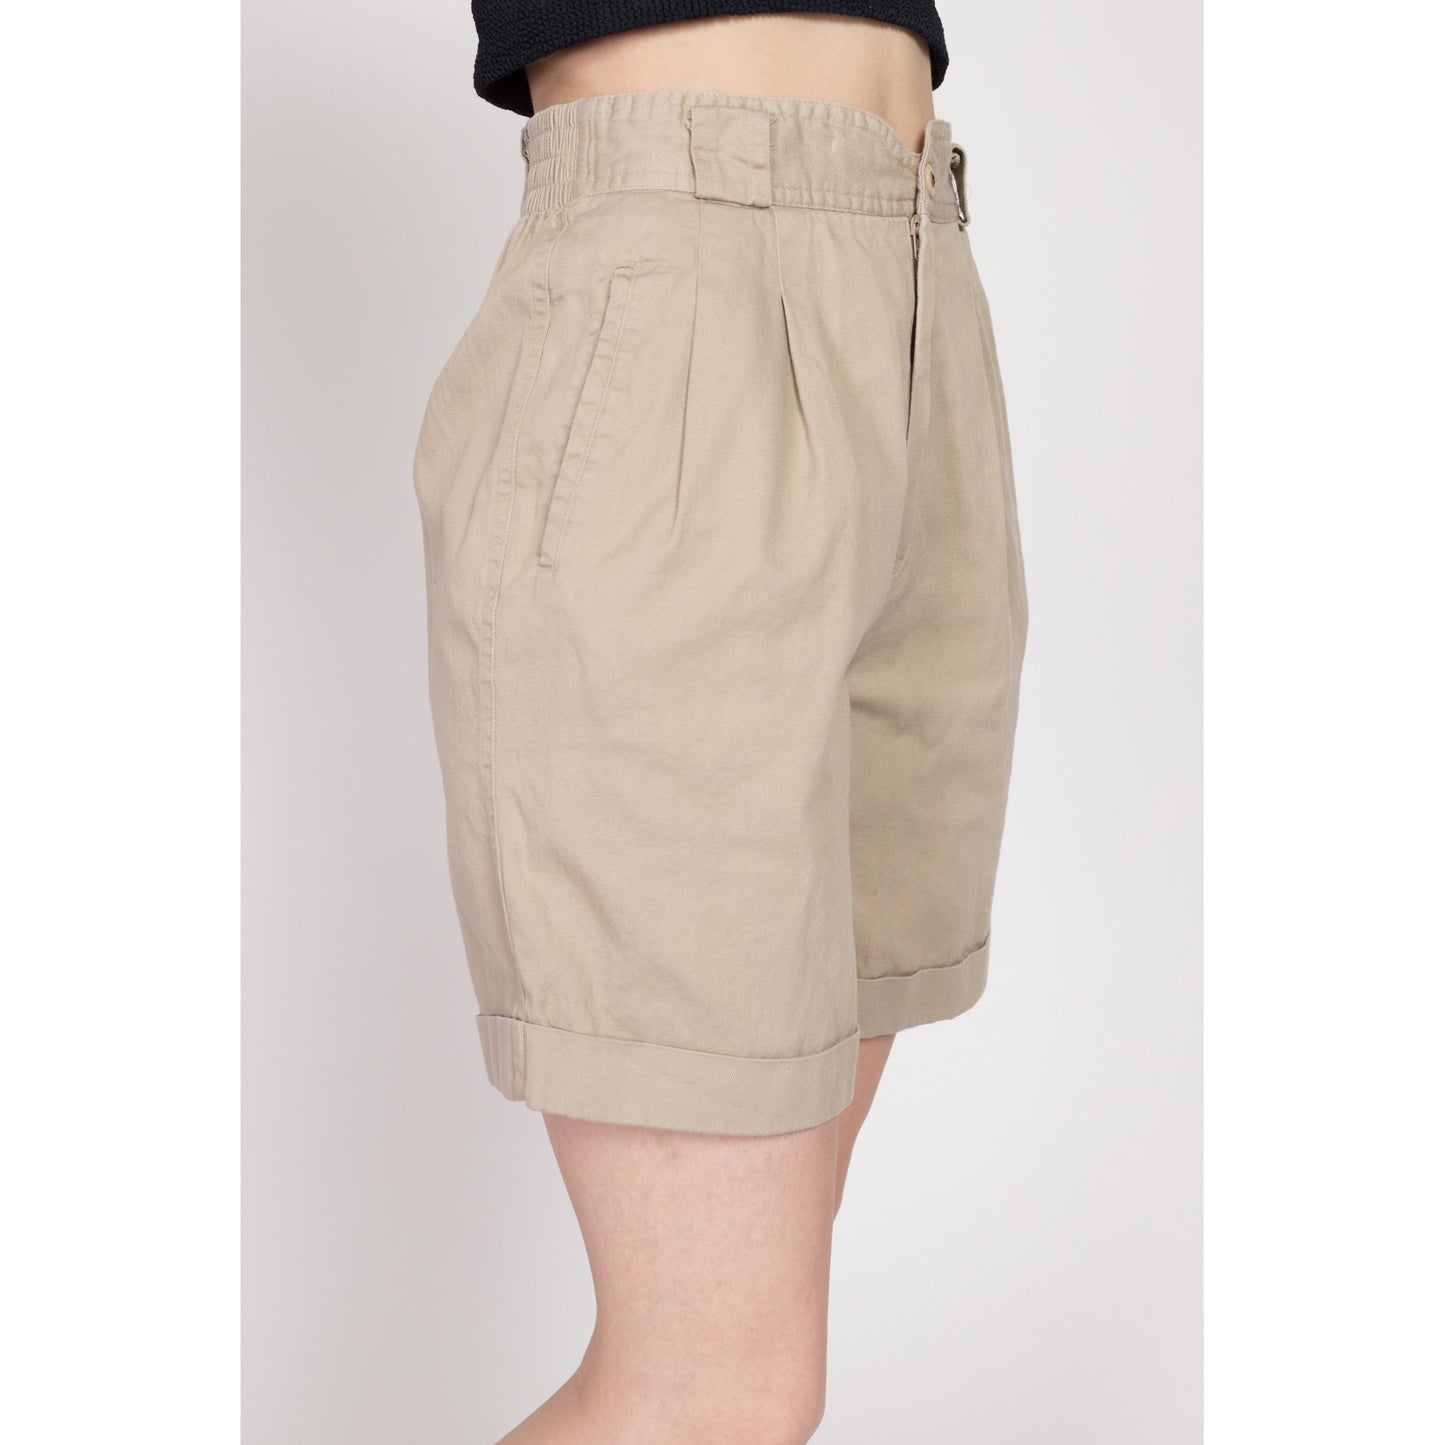 XS-Sm 80s Khaki High Waisted Pleated Shorts 24"-27" | Vintage Cotton Casual Mom Shorts